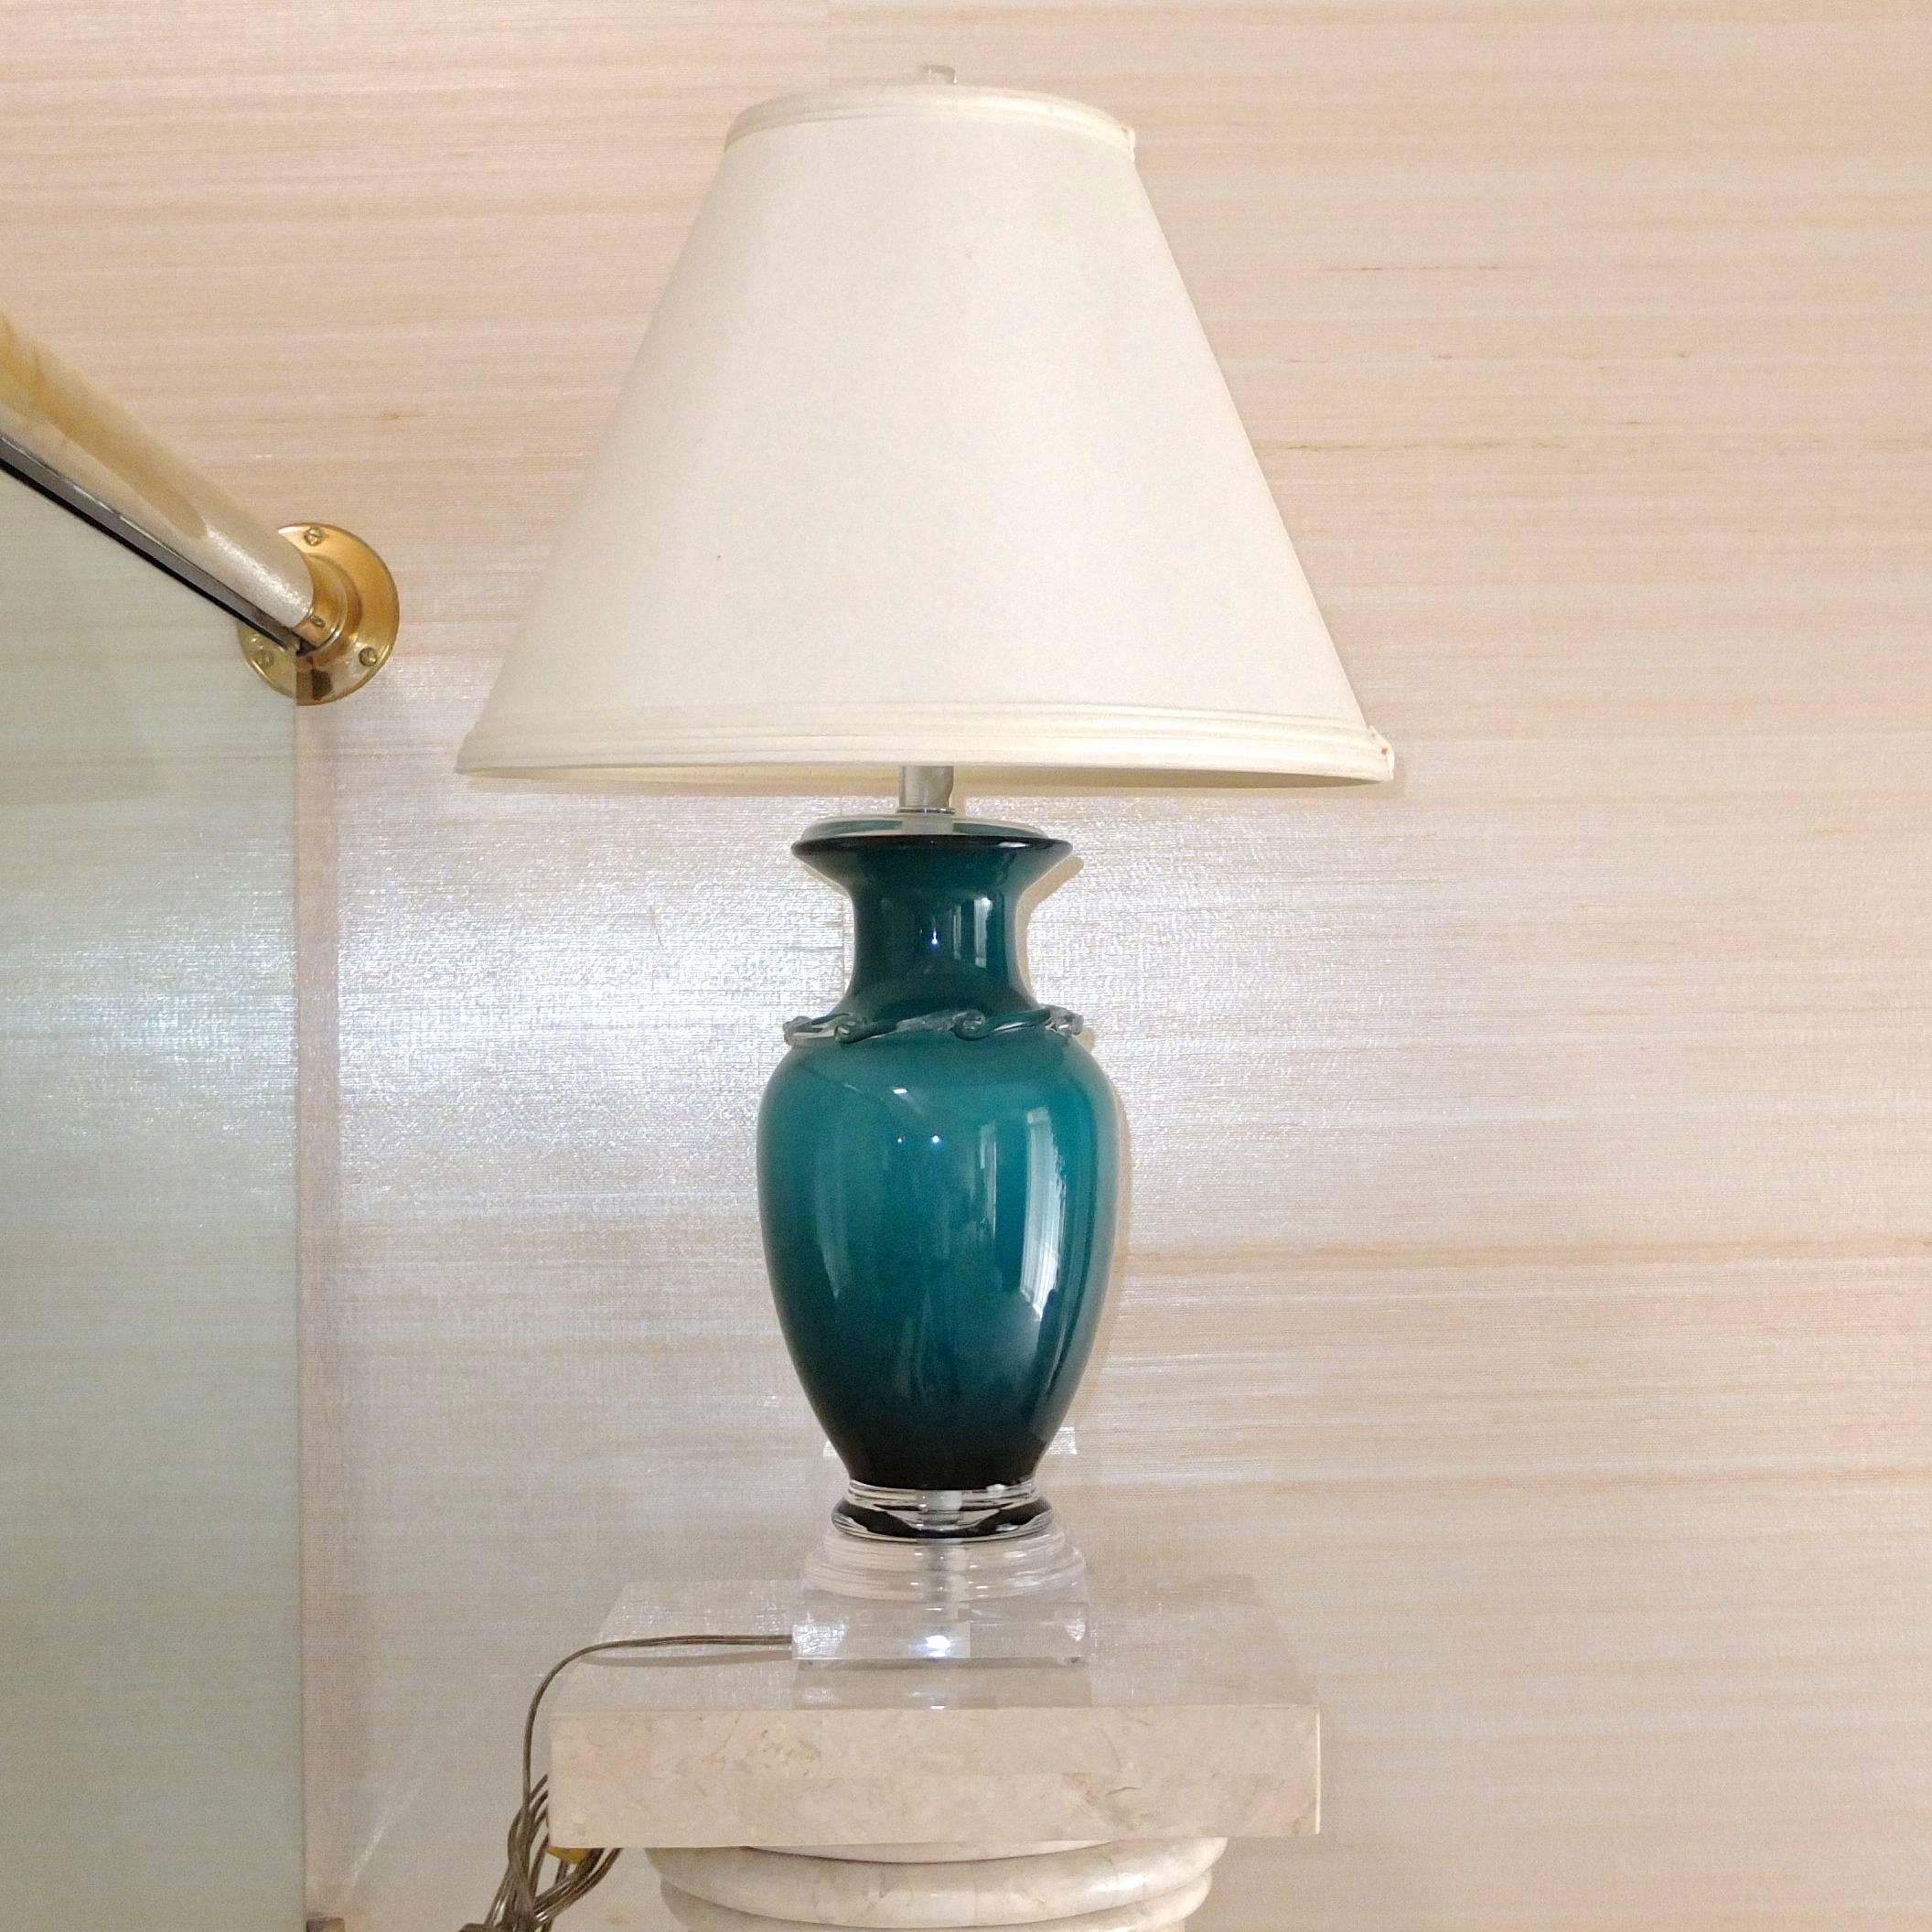 Frederick Cooper (signed) vase form table lamp in tonal colored glass (turquoise / teal) on clear glass base with original shade.


Although this is a single lamp, at the moment we happen to have a matching art glass vase which we can convert